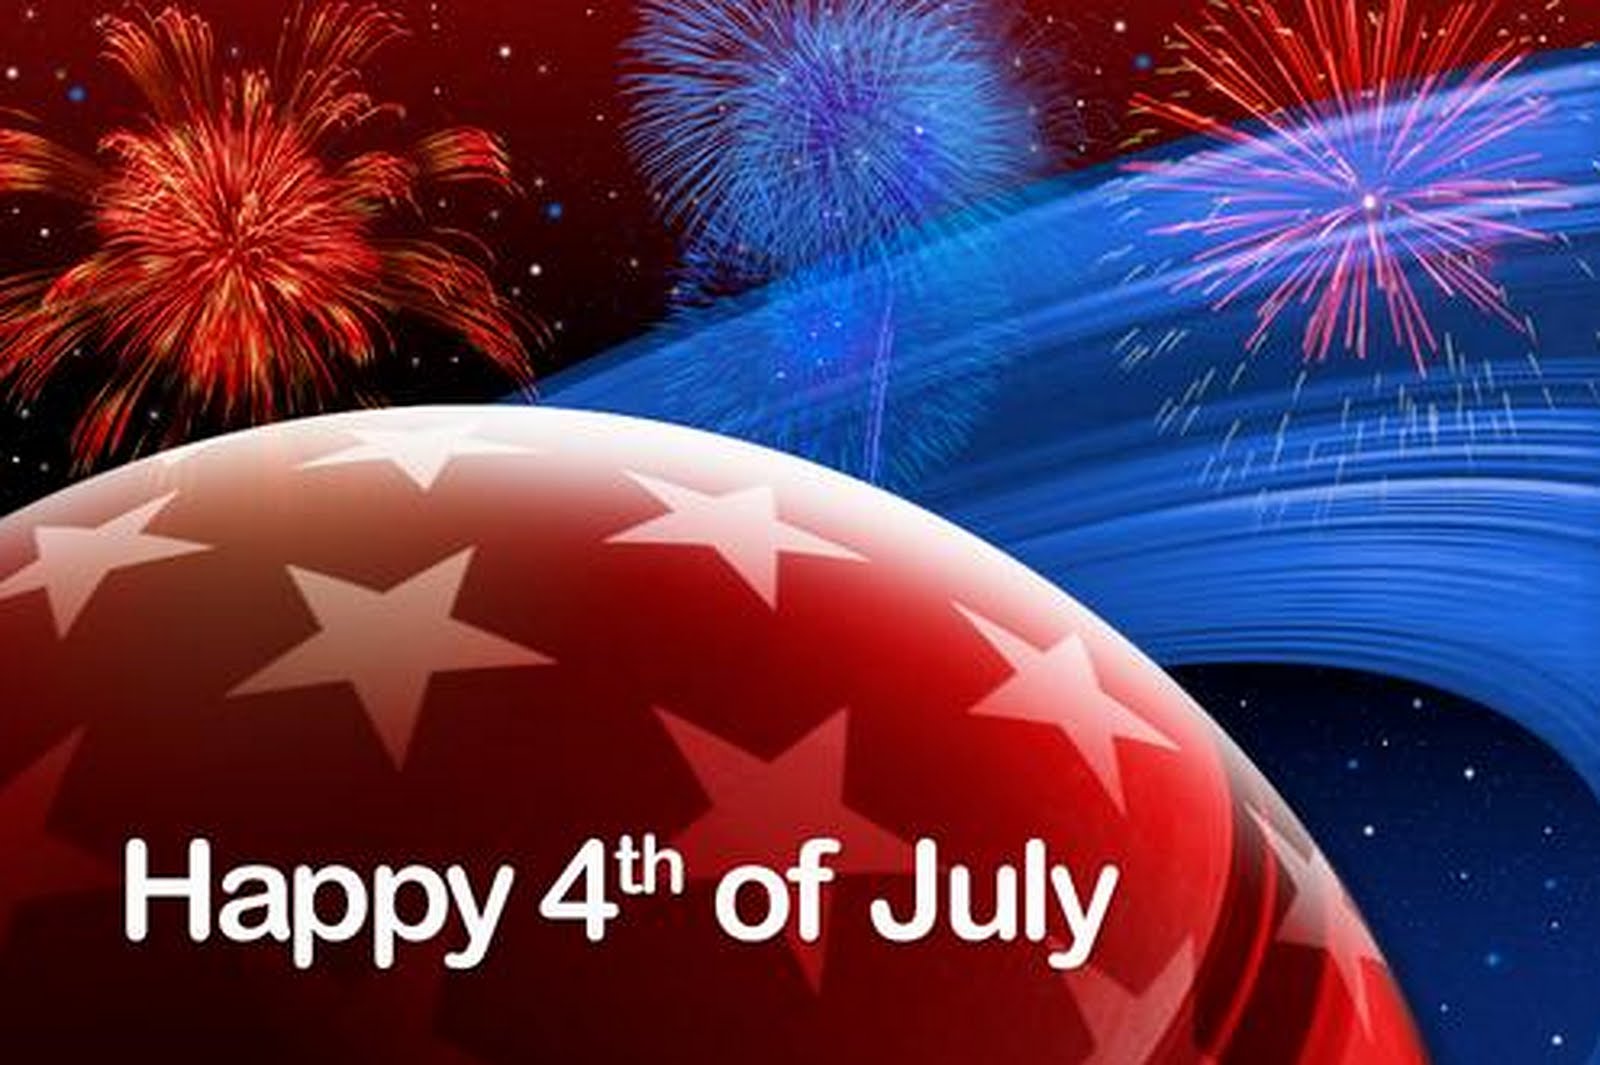 happy 4th of july clipart - photo #37